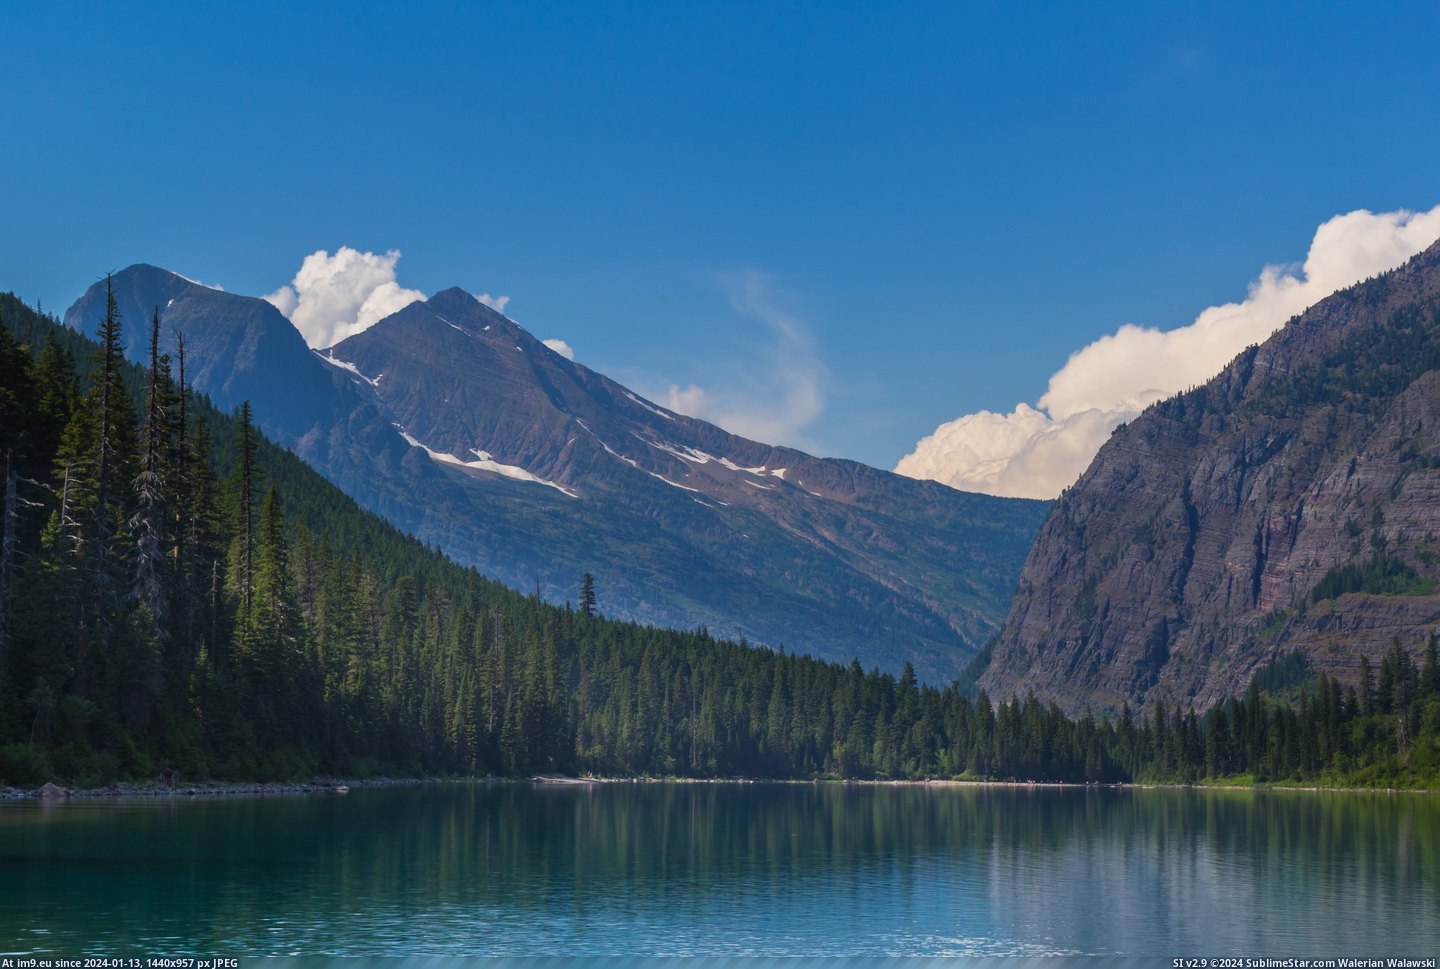 #One #Park #Shots #Glacier #Avalanche #National #Lake [Earthporn]  One of my best shots in Glacier National Park. Avalanche Lake. Taken August, 2014 [5074x3383] Pic. (Изображение из альбом My r/EARTHPORN favs))